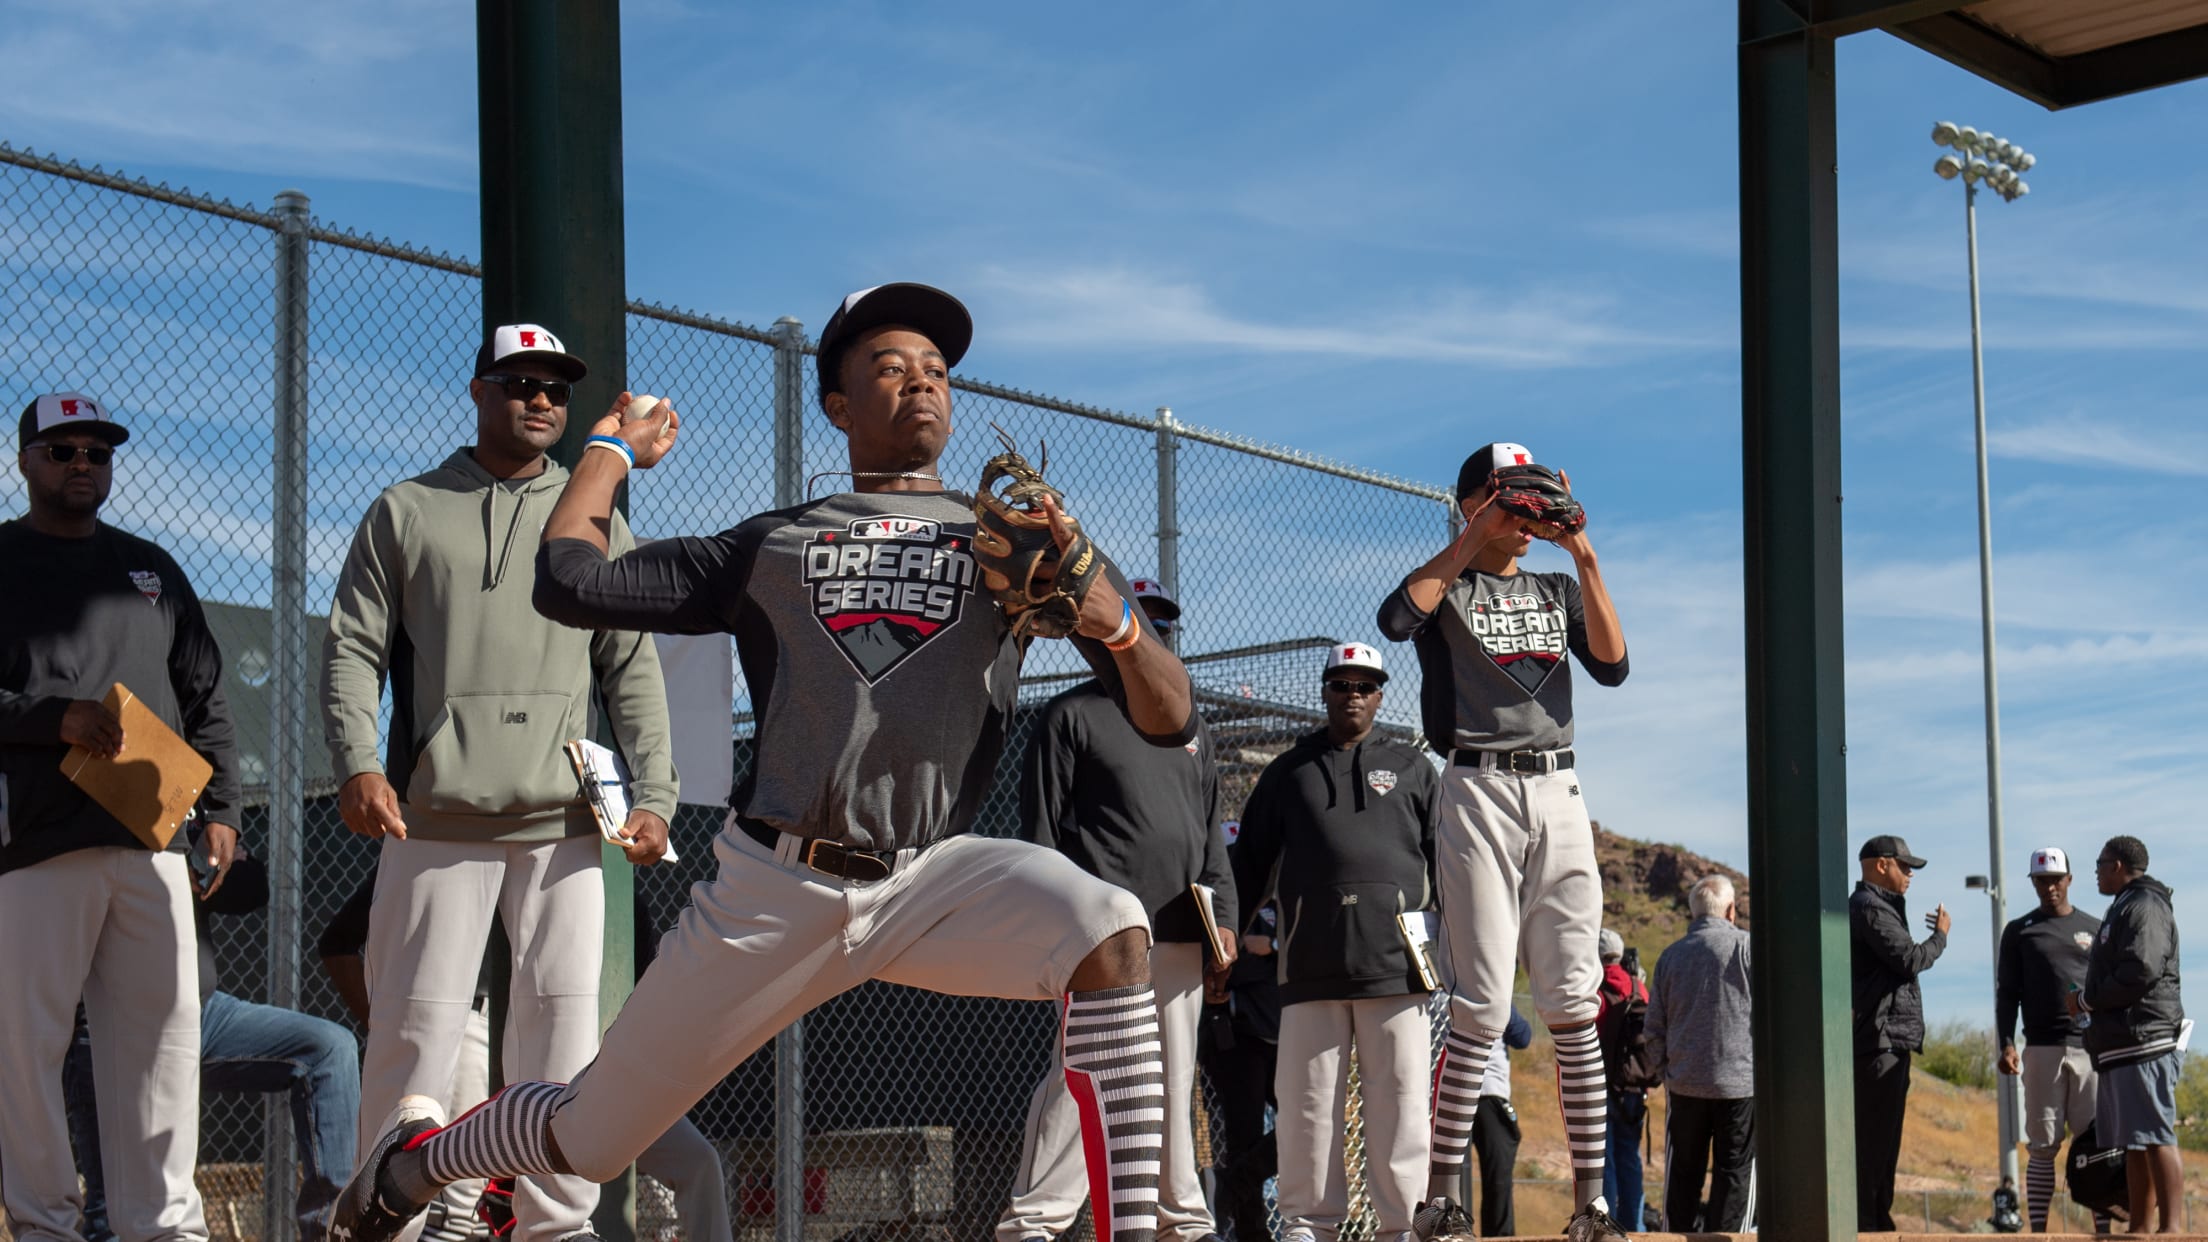 Baseball United an opportunity for Black players and ownership in